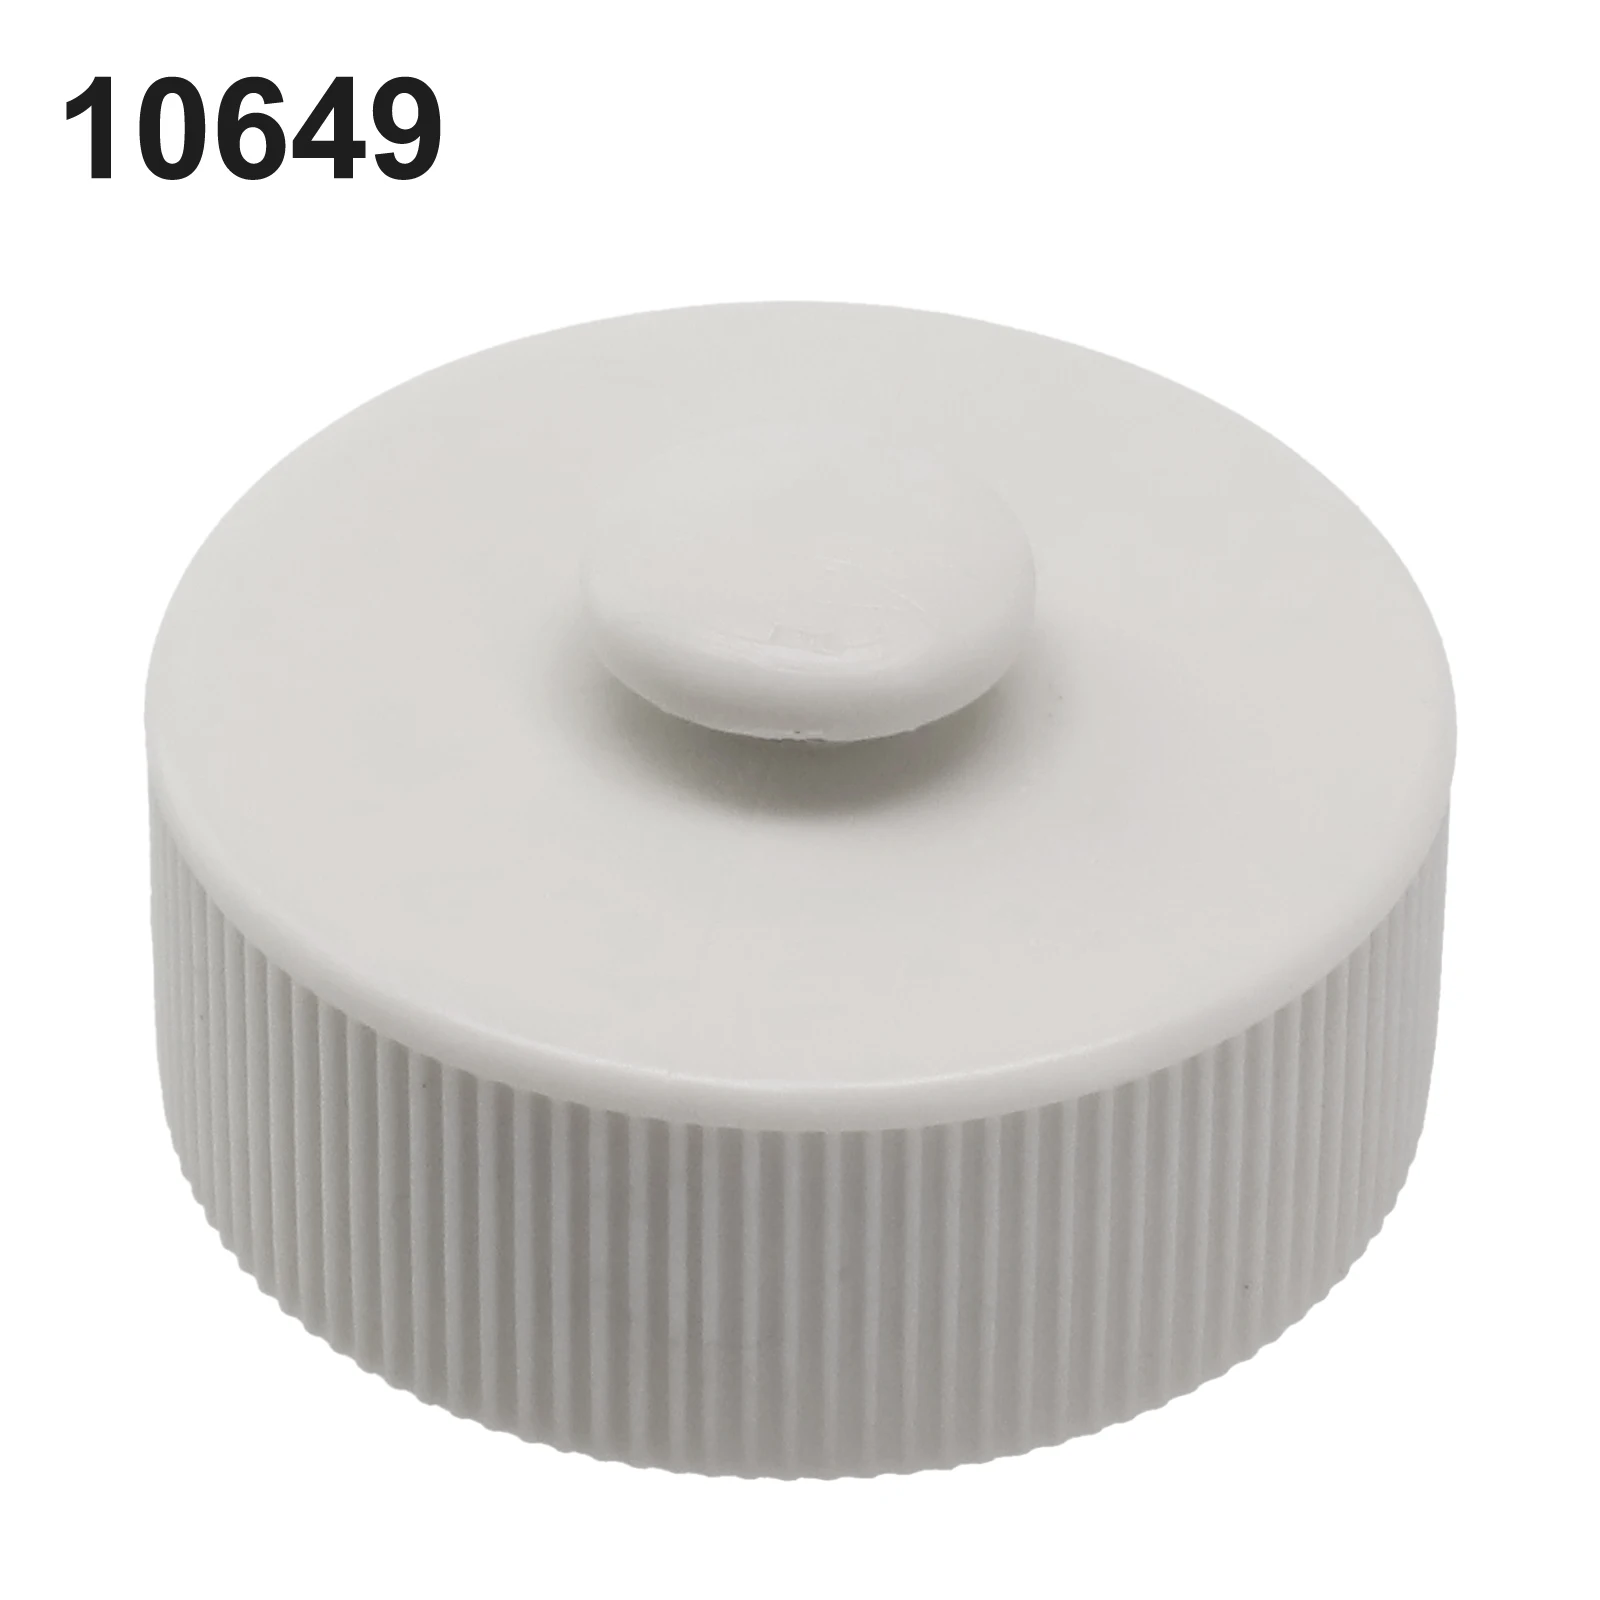 

1 PCS 10649 Screw Cap Replacement Pool Drain Cap For Intex For-Pools 42 Inches Higher For 36 Inch Or Less Swimming-Pool White